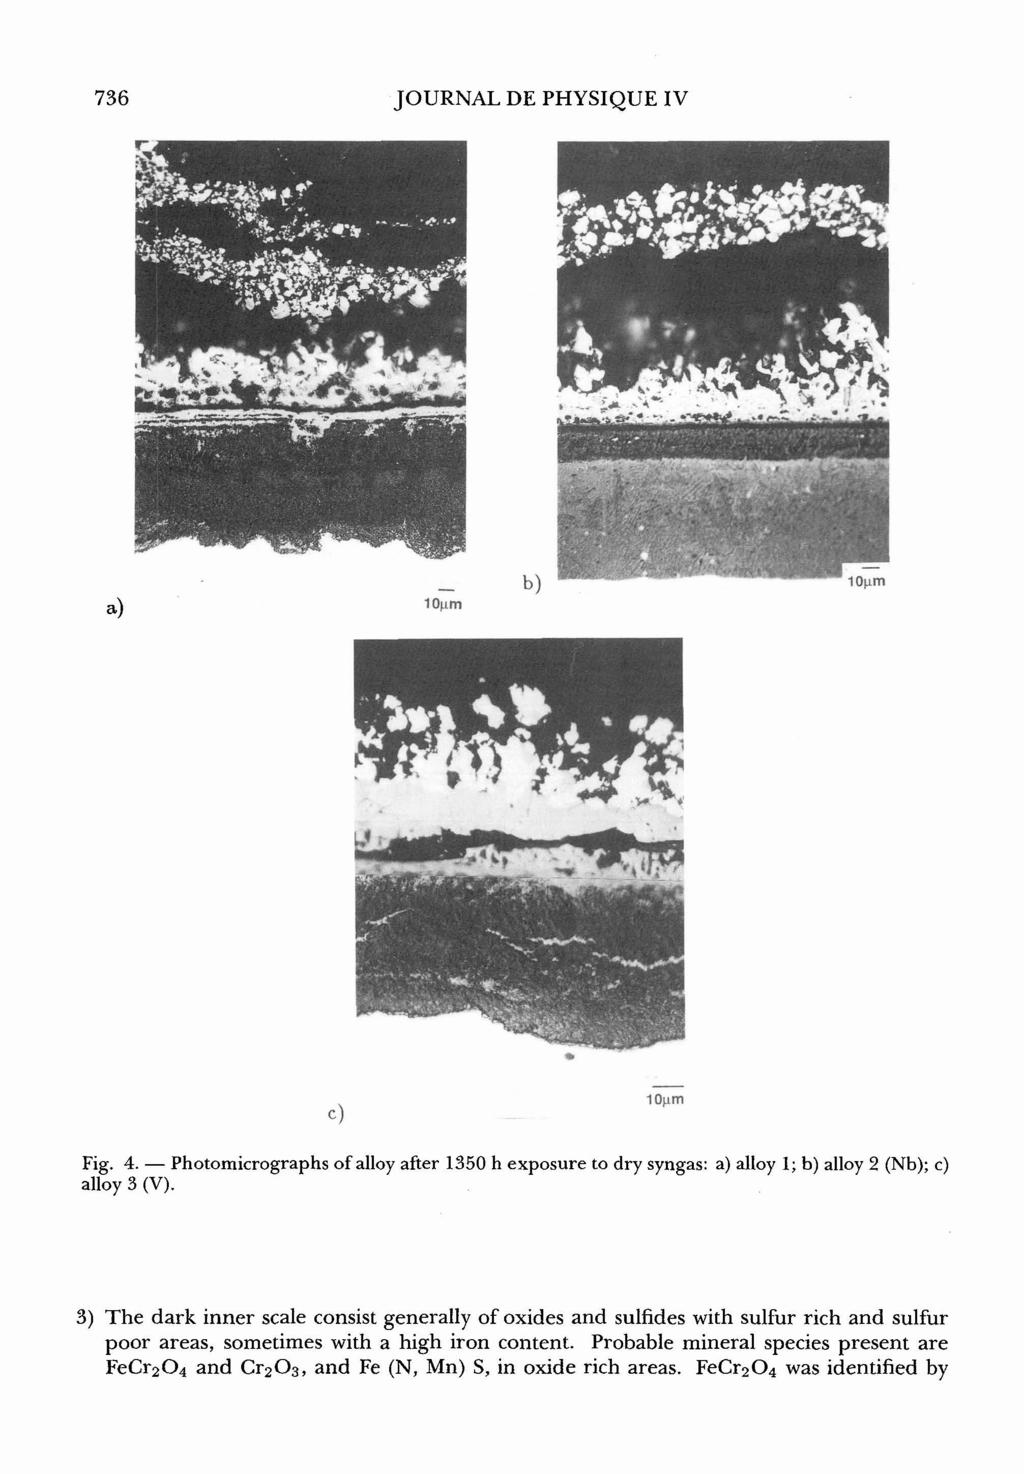 736 JOURNAL DE PHYSIQUE IV Fig. 4. - Photomicrographs of alloy after 1350 h exposure to dry syngas: a) alloy 1; b) alloy 2 (Nb); c) alloy 3 (V).